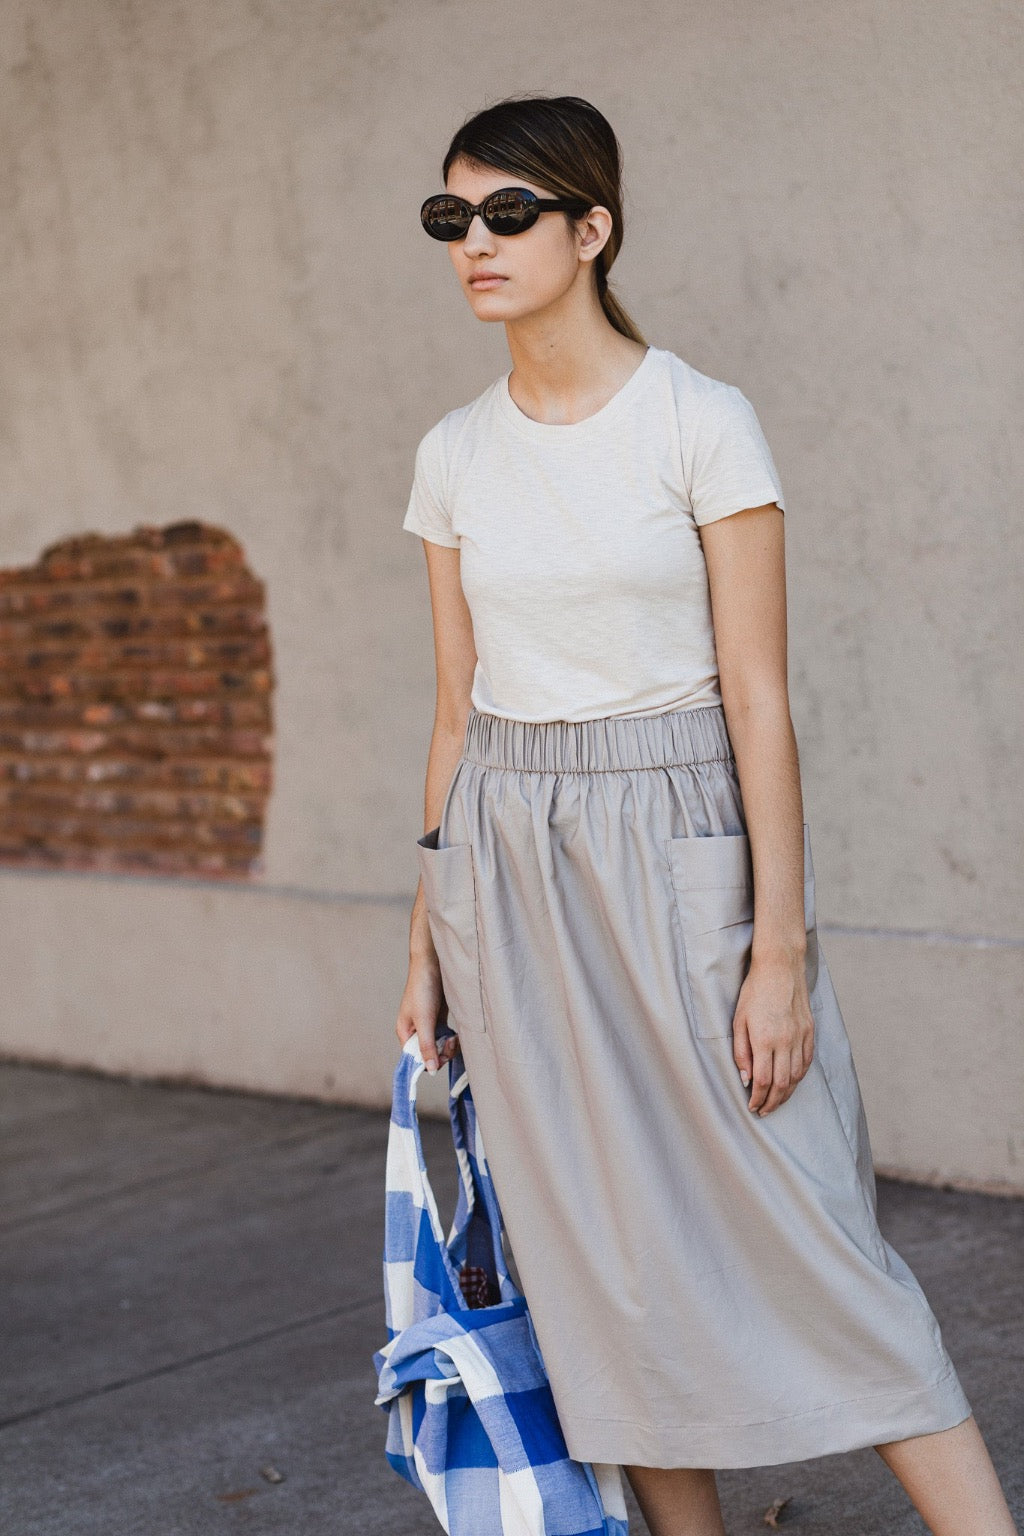 A-Line Skirt in Sand Cotton 